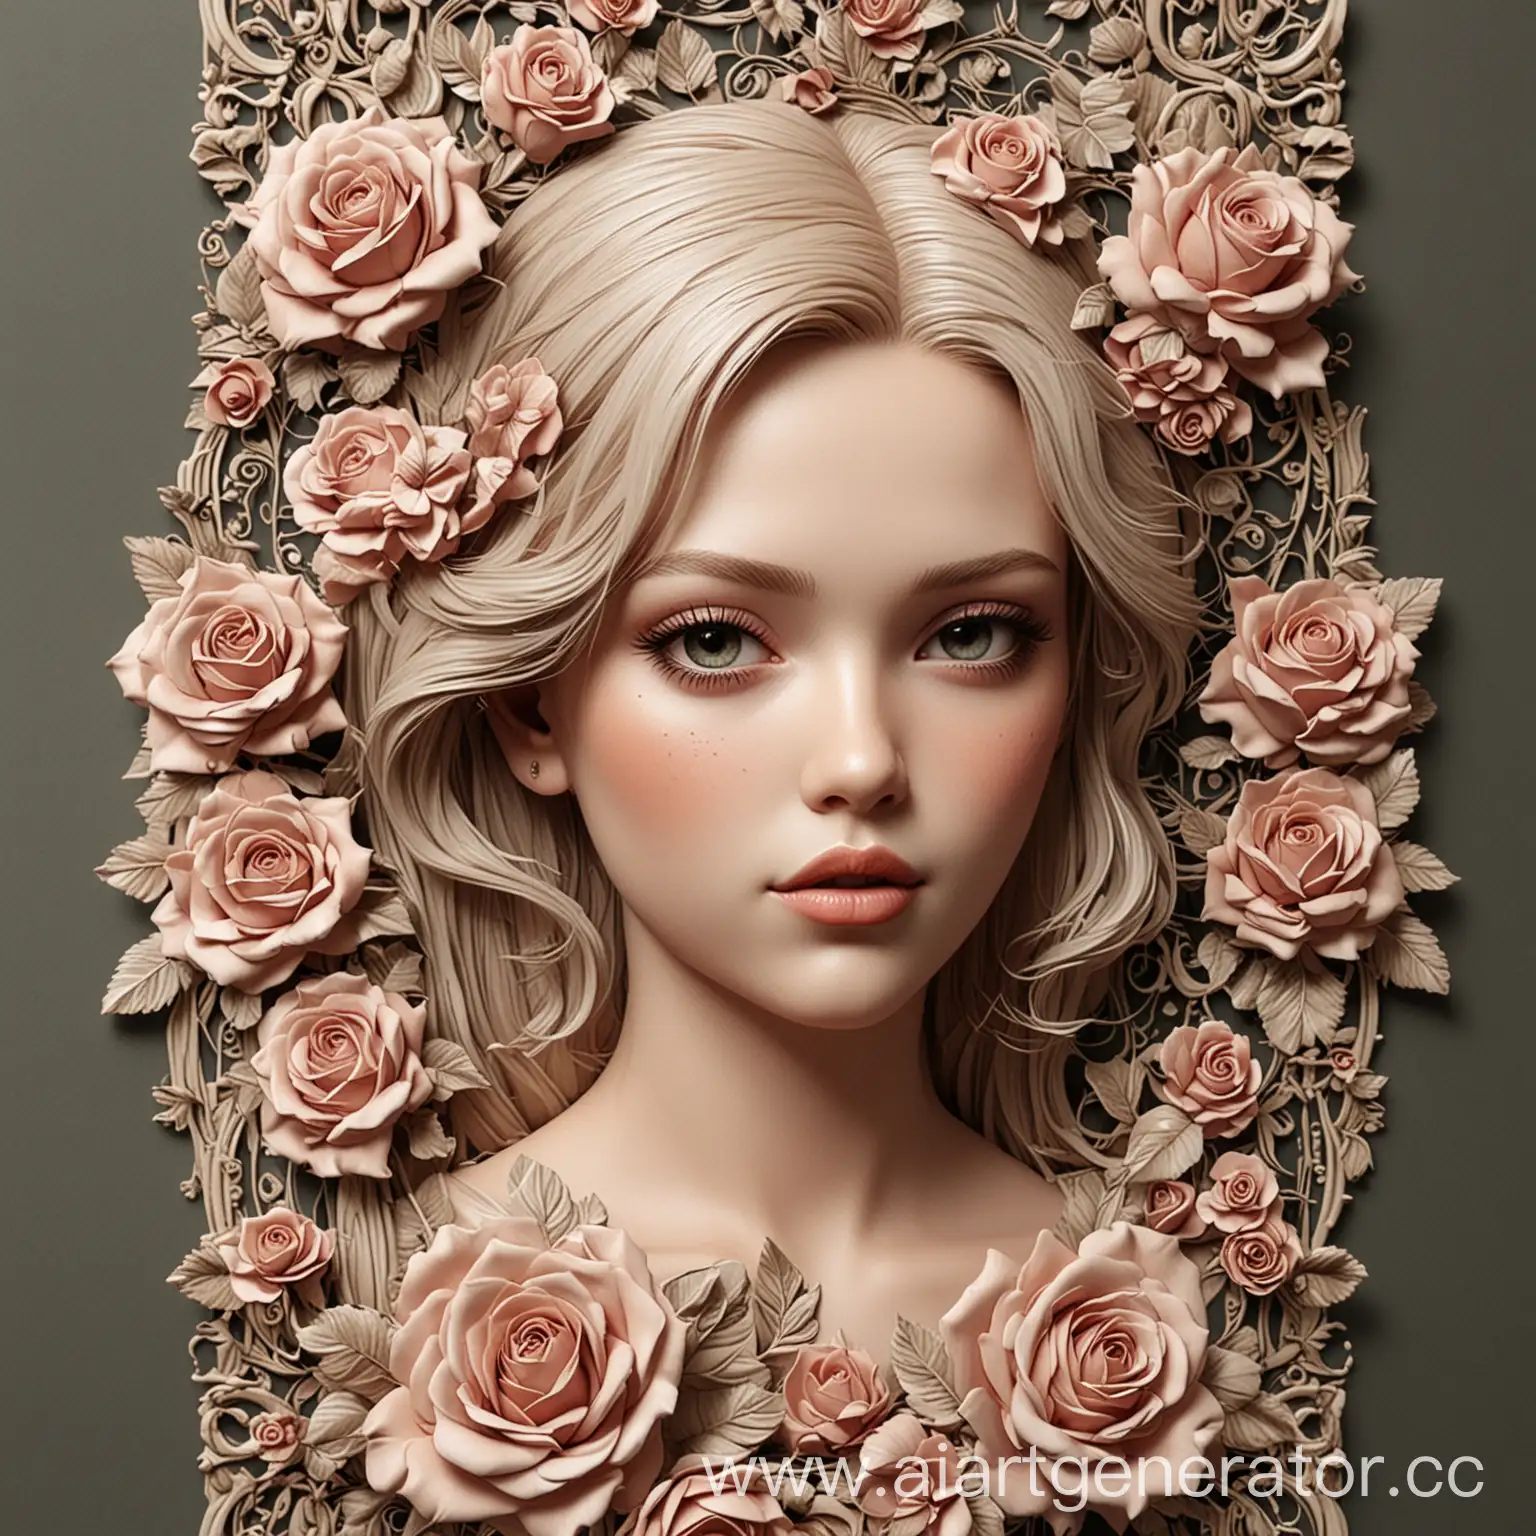 Girl-Creating-Ornamental-Patterns-and-Roses-in-2D-Format